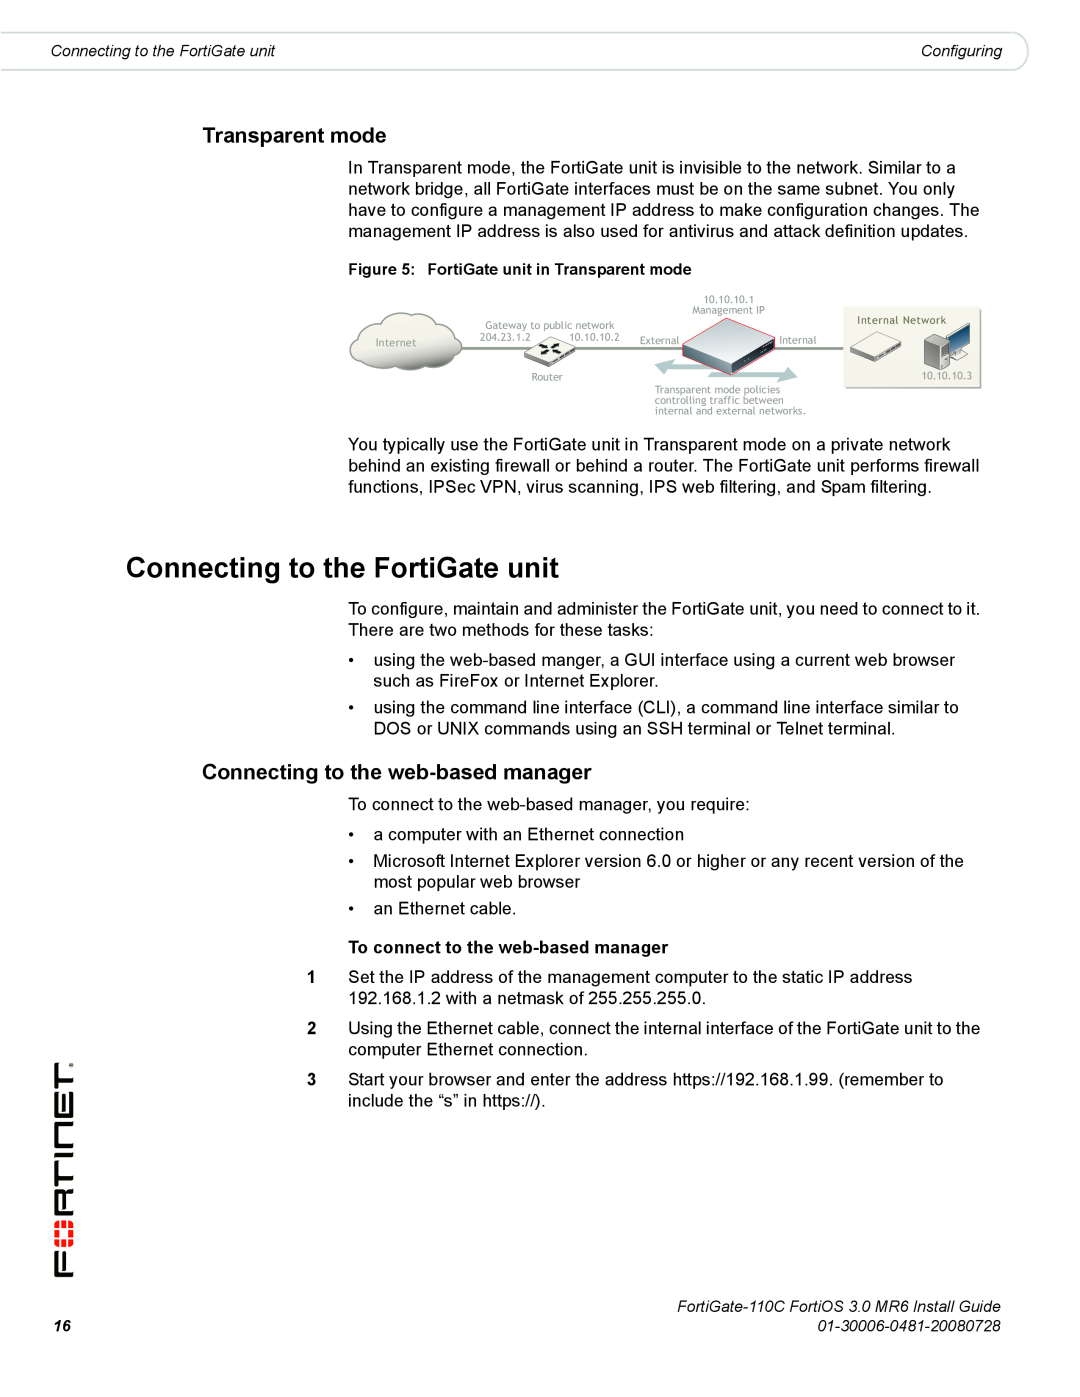 Fortinet 110C manual Connecting to the FortiGate unit, Transparent mode, Connecting to the web-based manager 